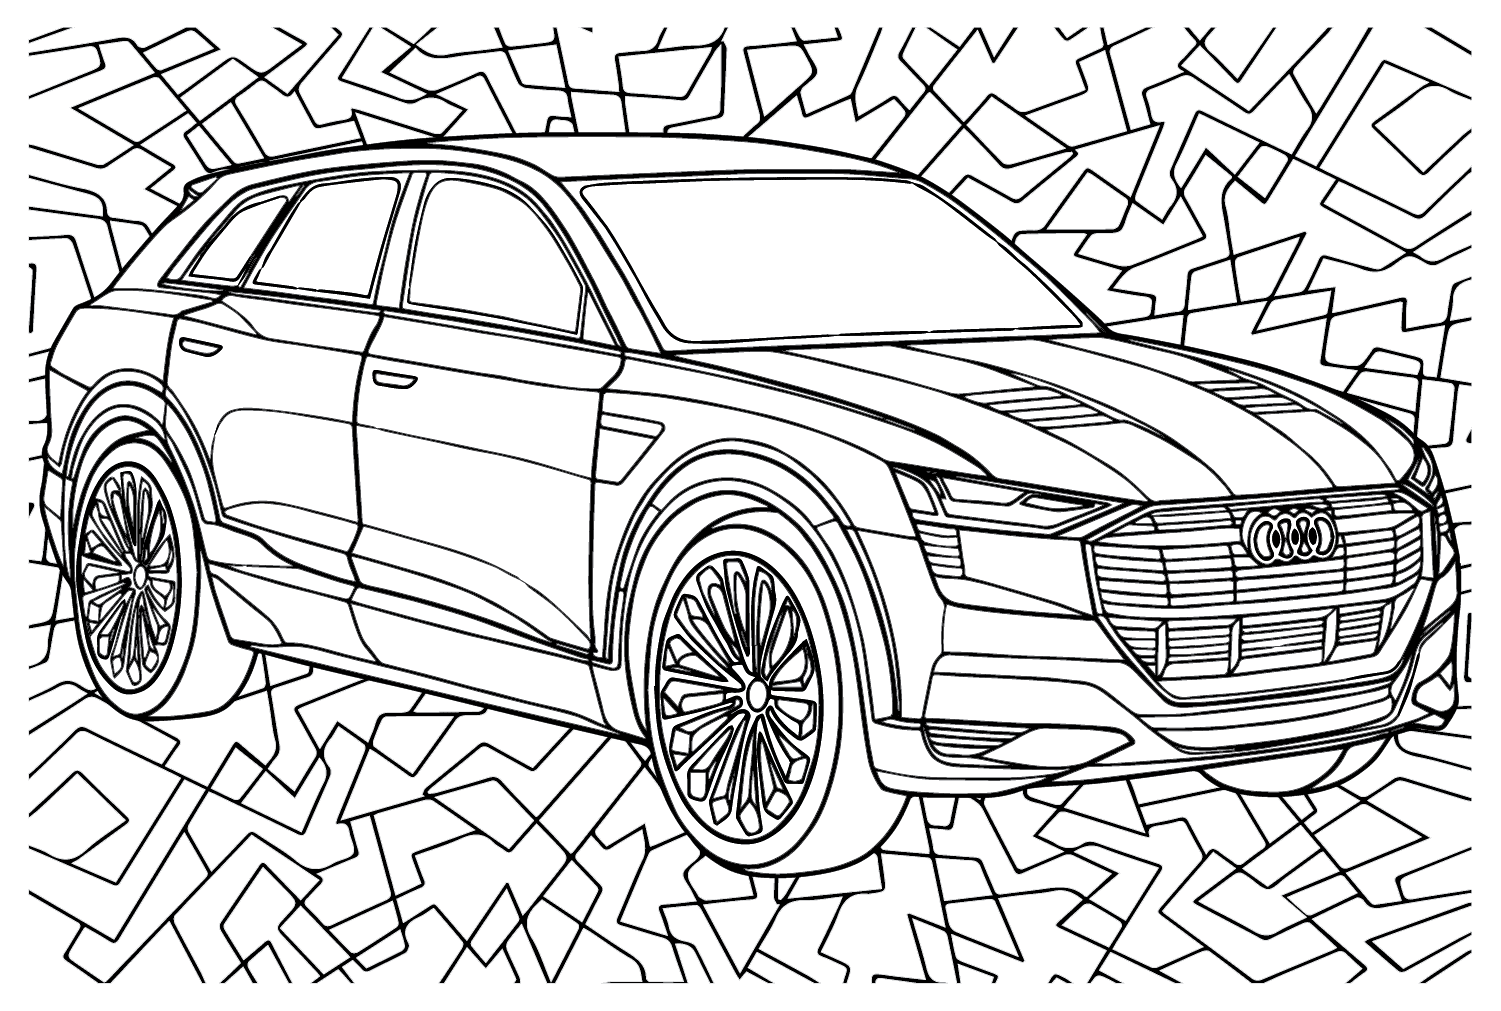 Audi e-tron 55 Quattro Coloring Page - Free Printable Coloring Pages